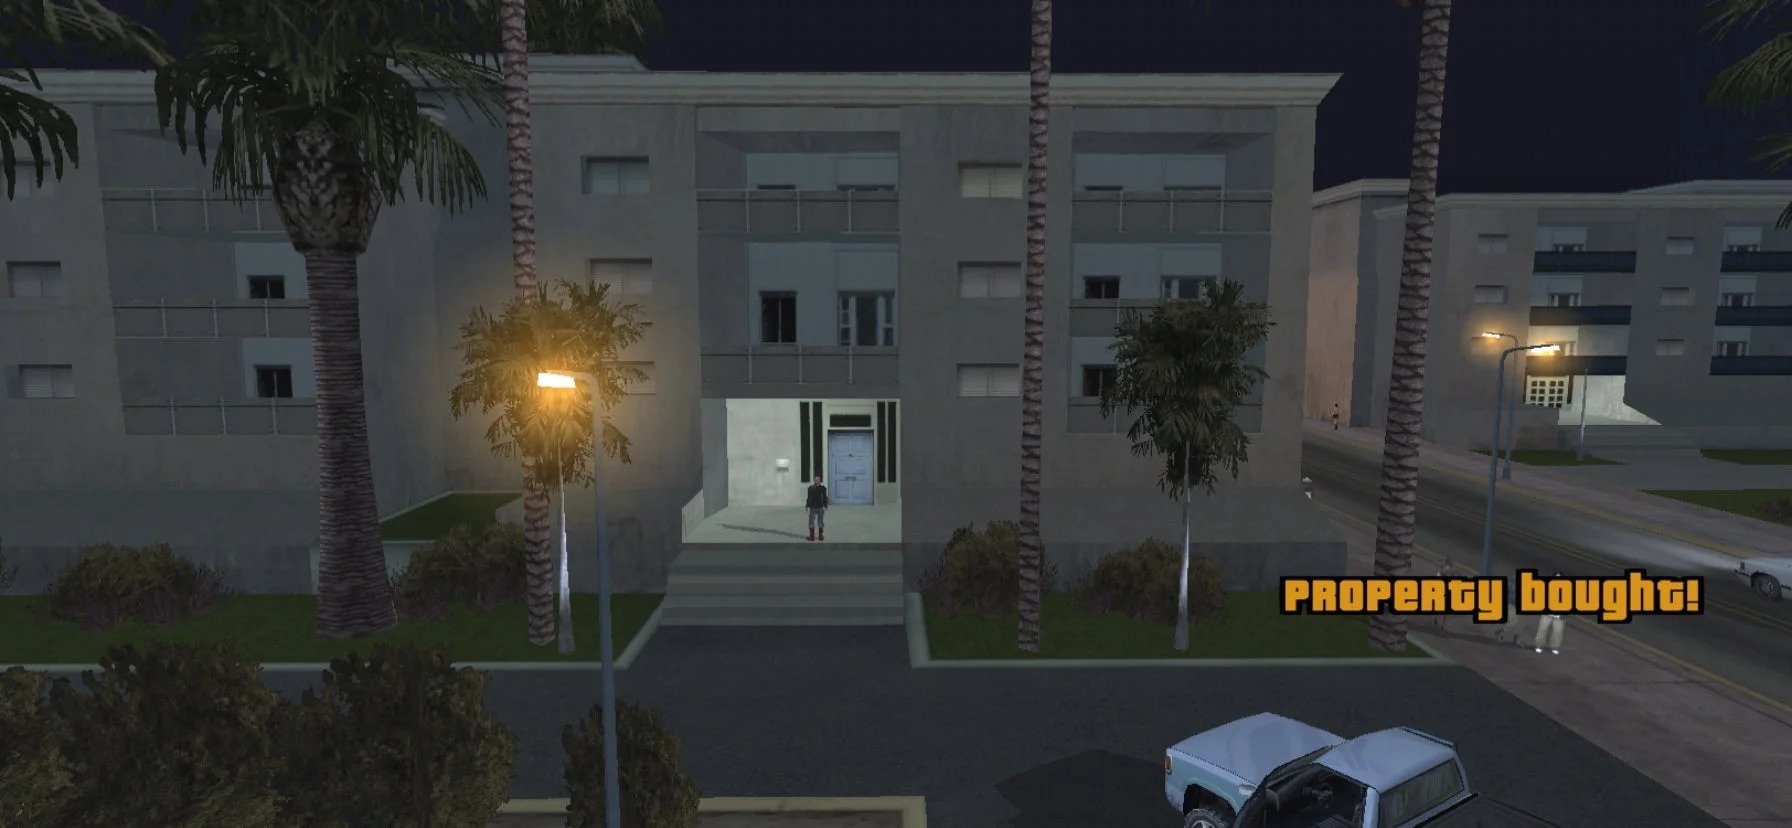 Features from Grand Theft Auto: San Andreas That We’d Love to See Return in GTA VI